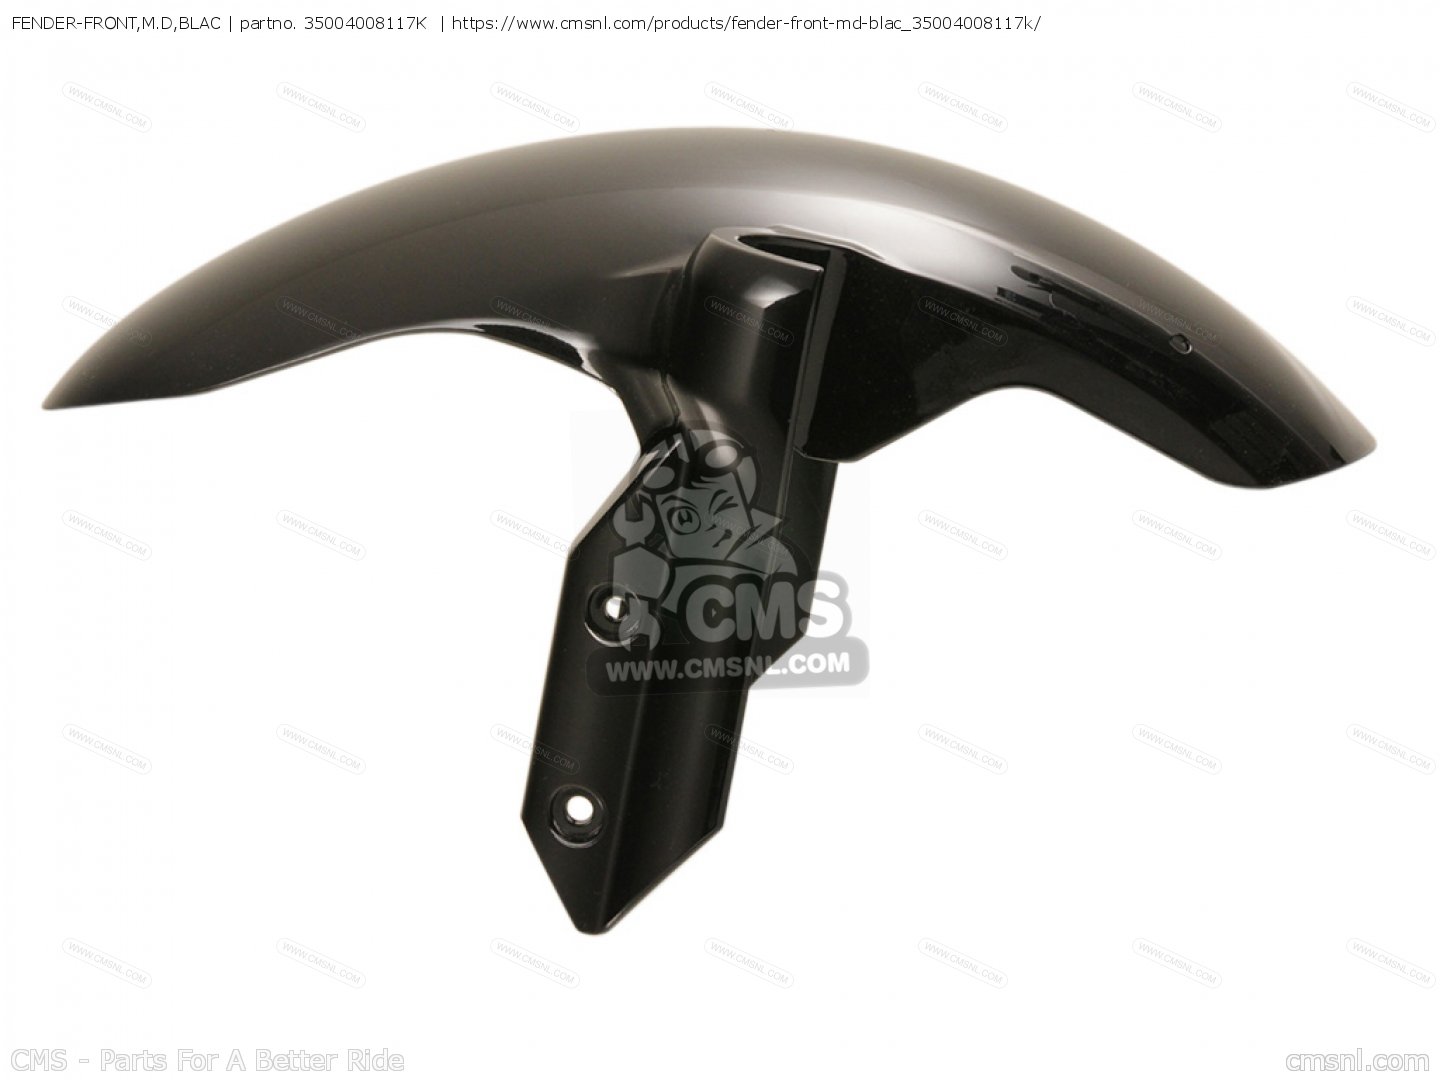 FENDER-FRONT,M.D,BLAC for KLE650B7F VERSYS EUROPE,MIDDLE EAST,AFRICA,UK - order at